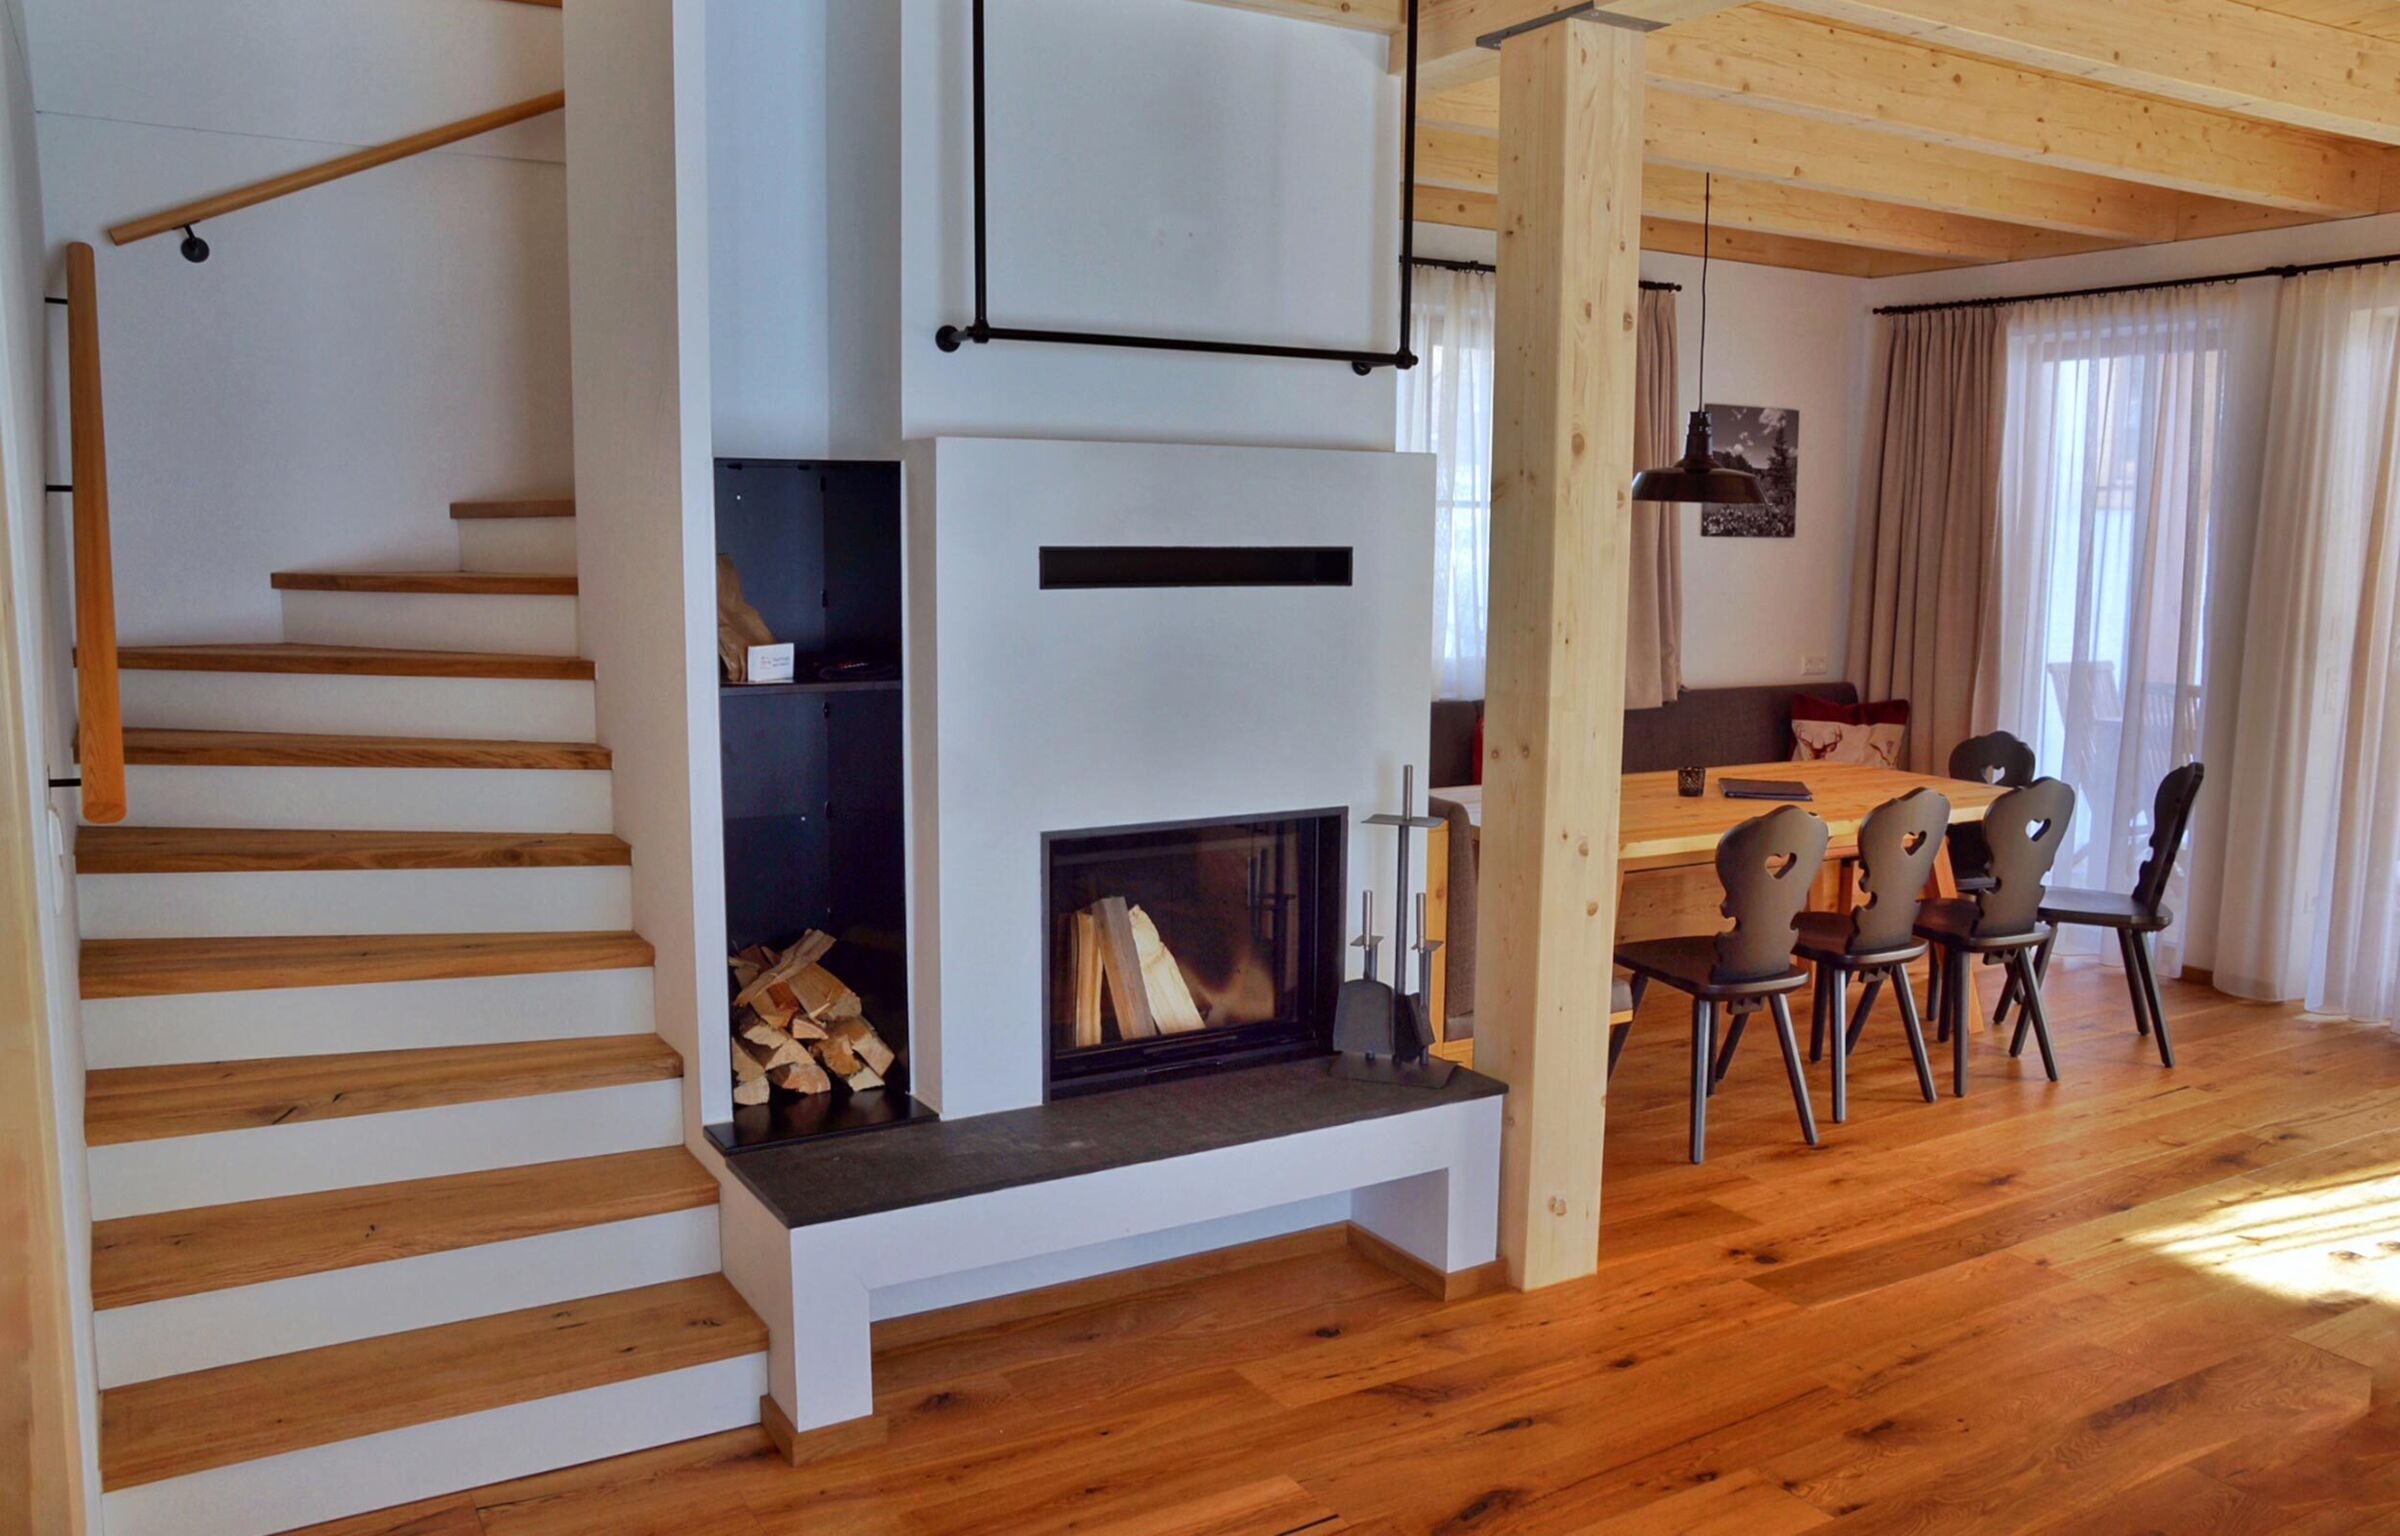 In the chalet in Bad Kleinkirchheim there is a staircase, a dining area and a fireplace.